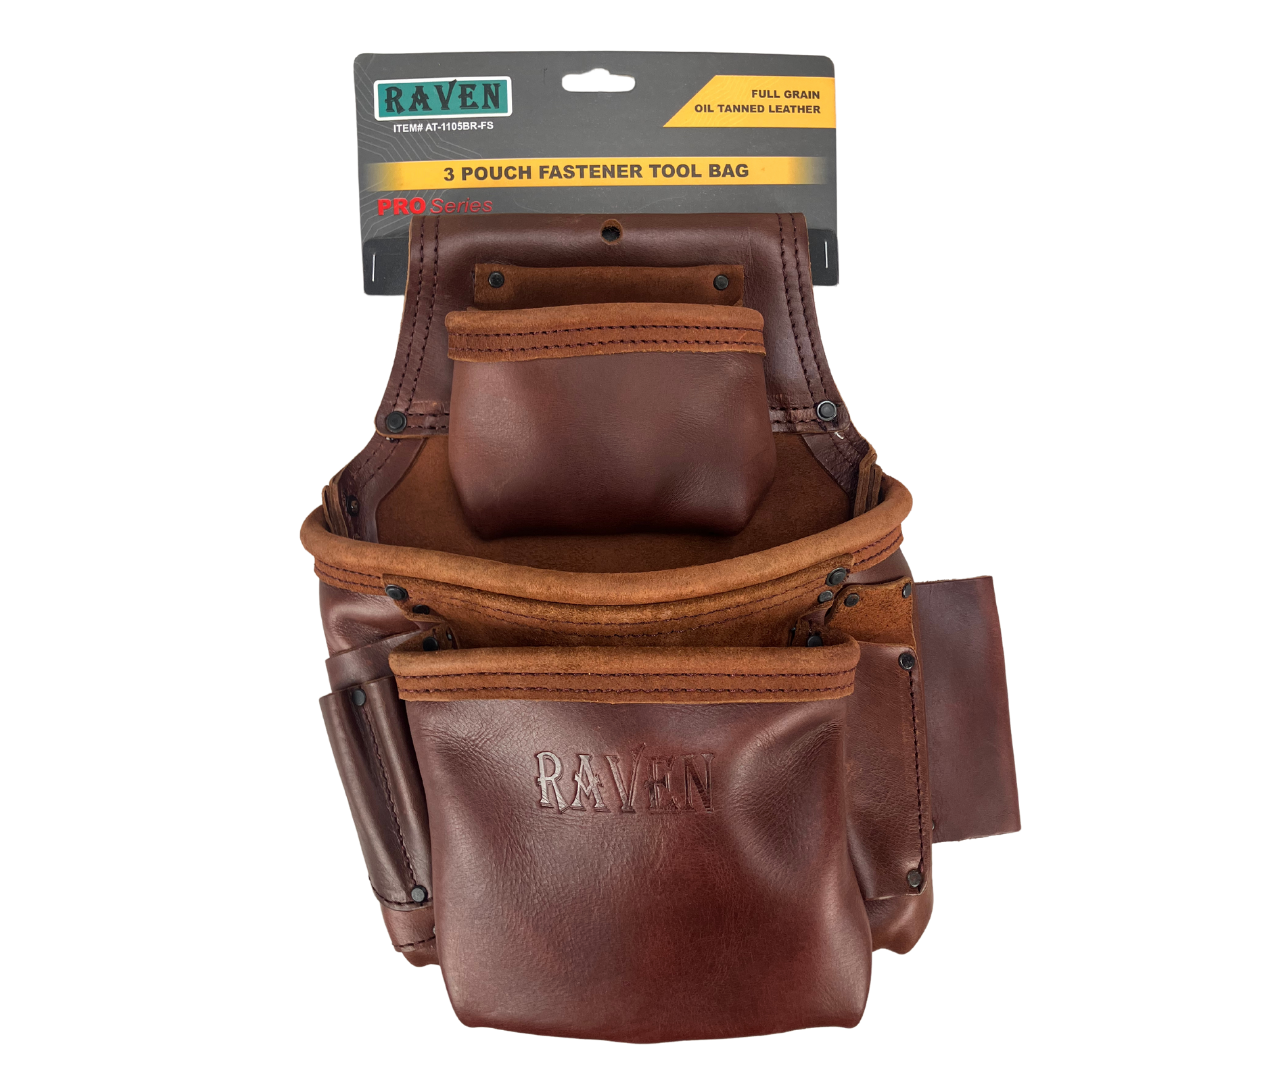 3 Pouch Professional's Heavy Duty Fastener Tool Pouch | Full Grain Oil Tanned Leather